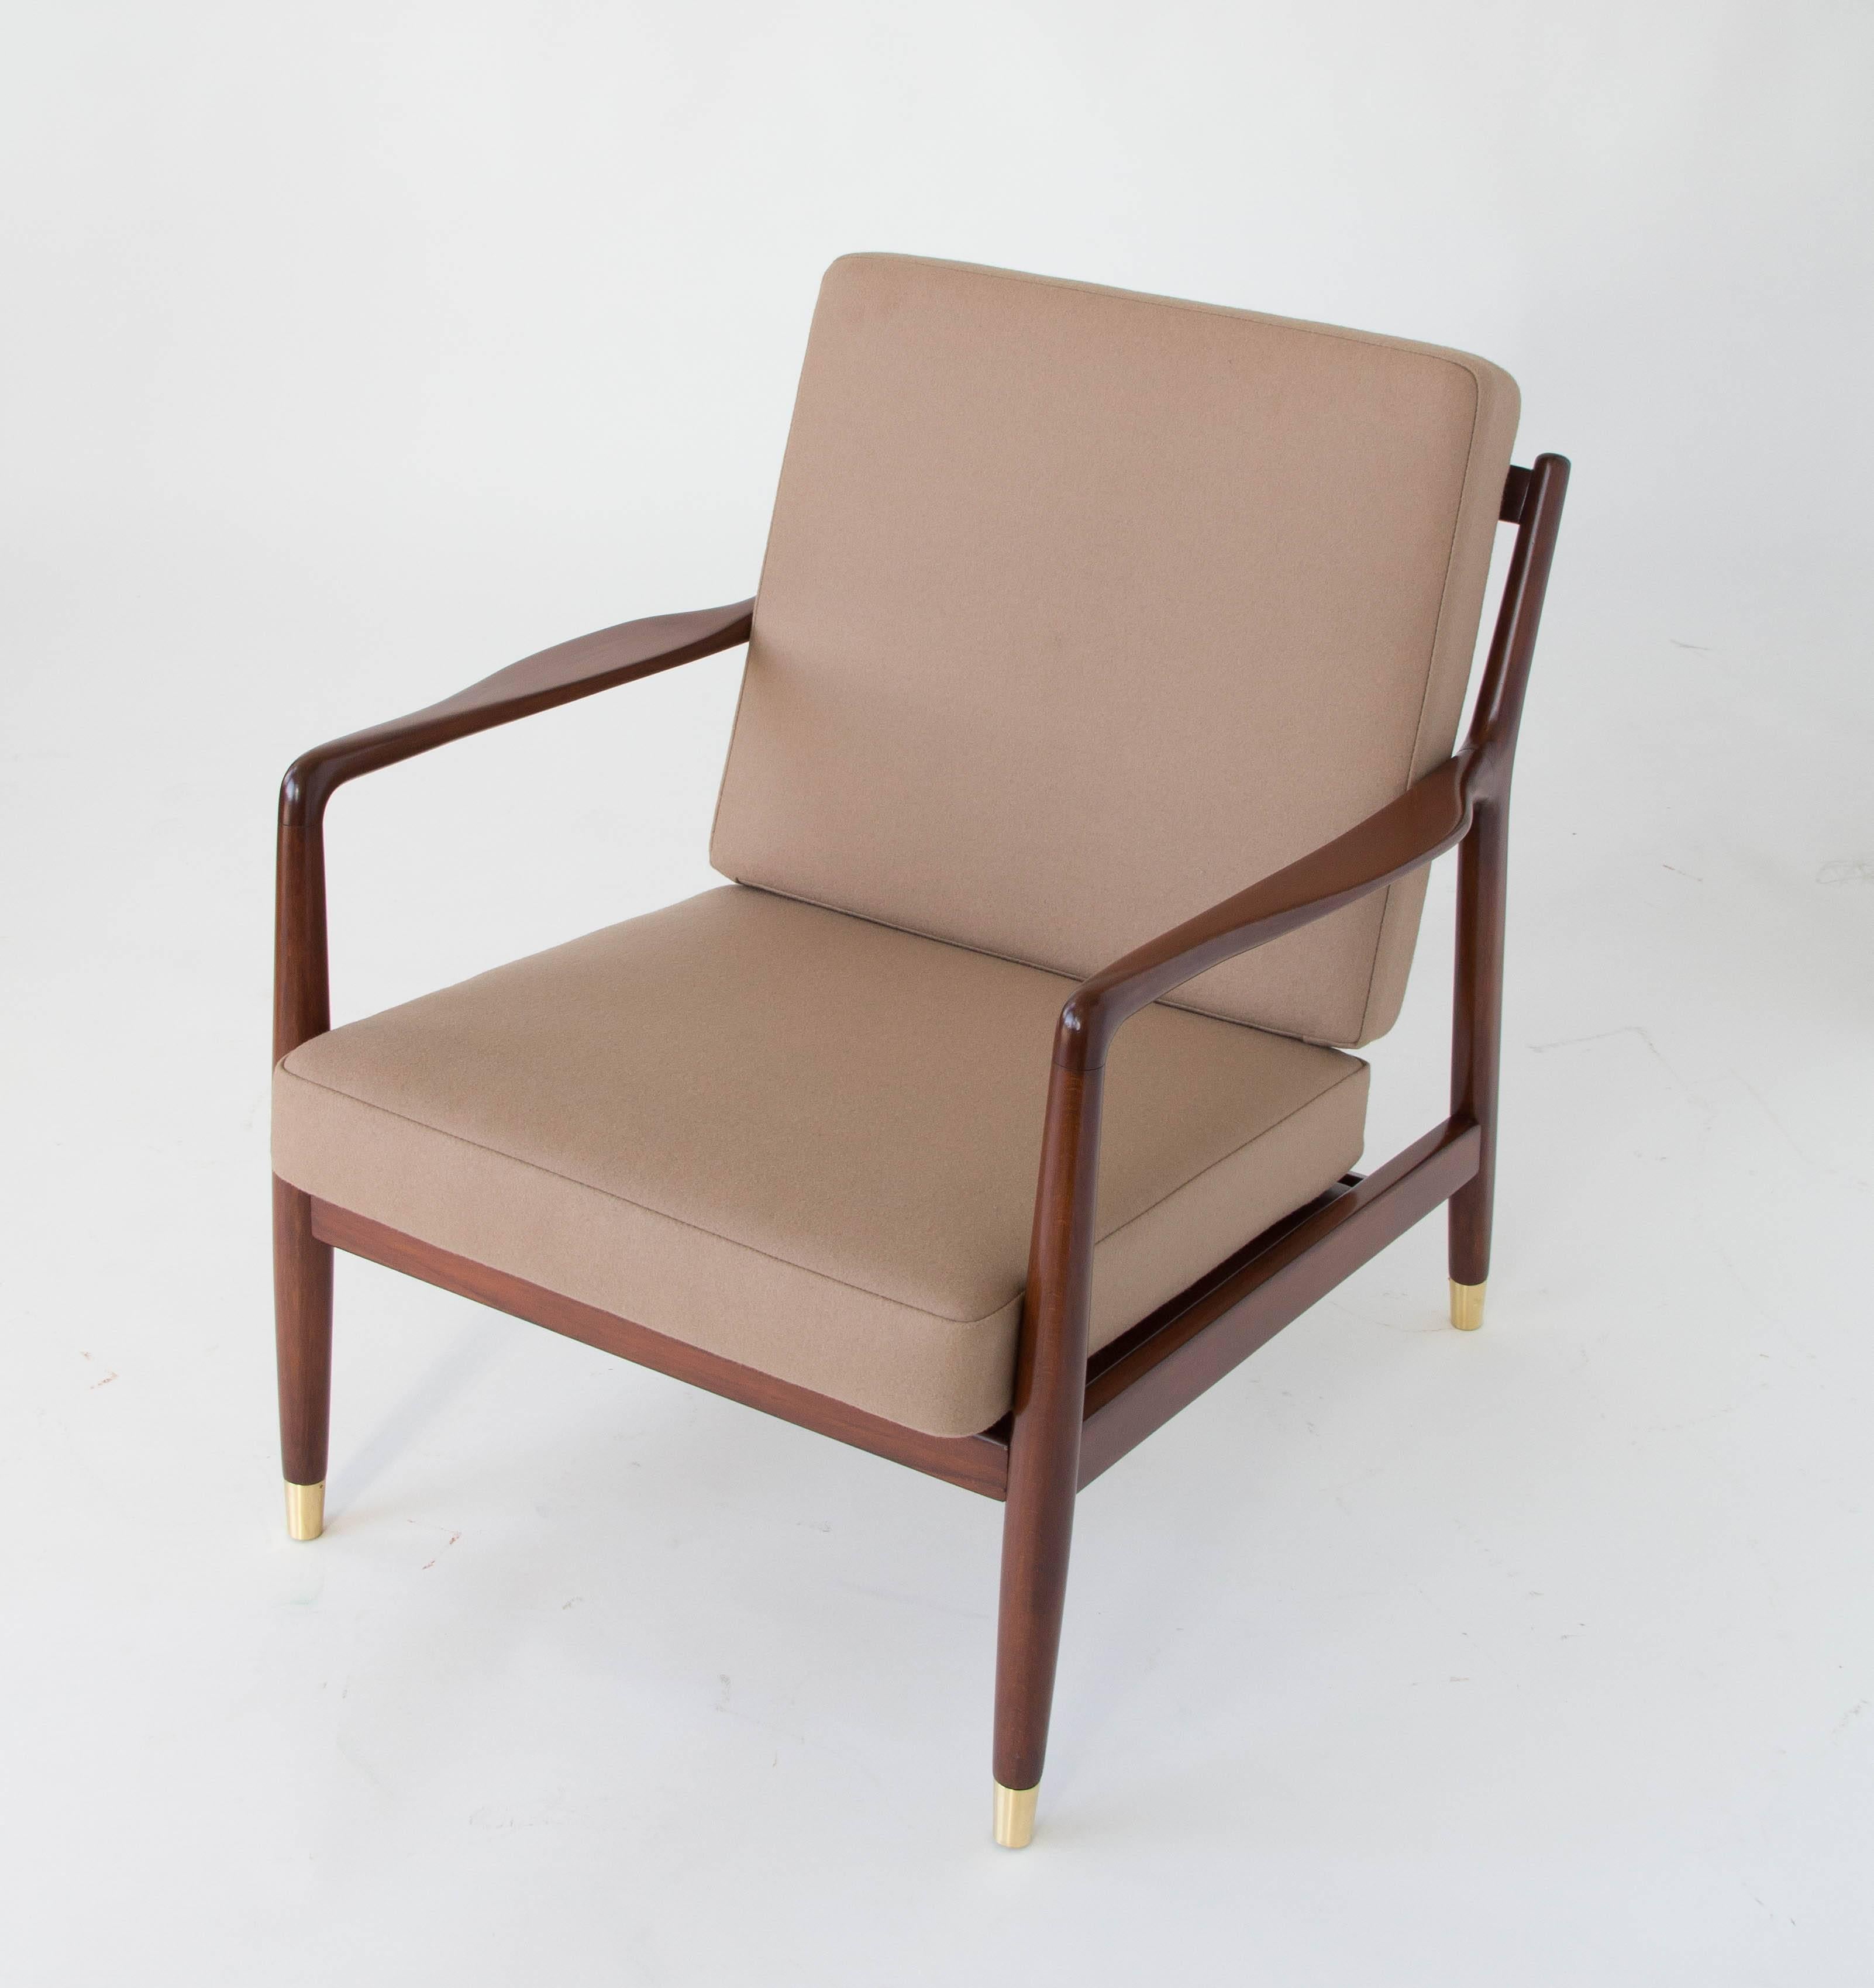 Swedish Pair of Lounge Chairs with Brass-Capped Legs by Folke Ohlsson for DUX